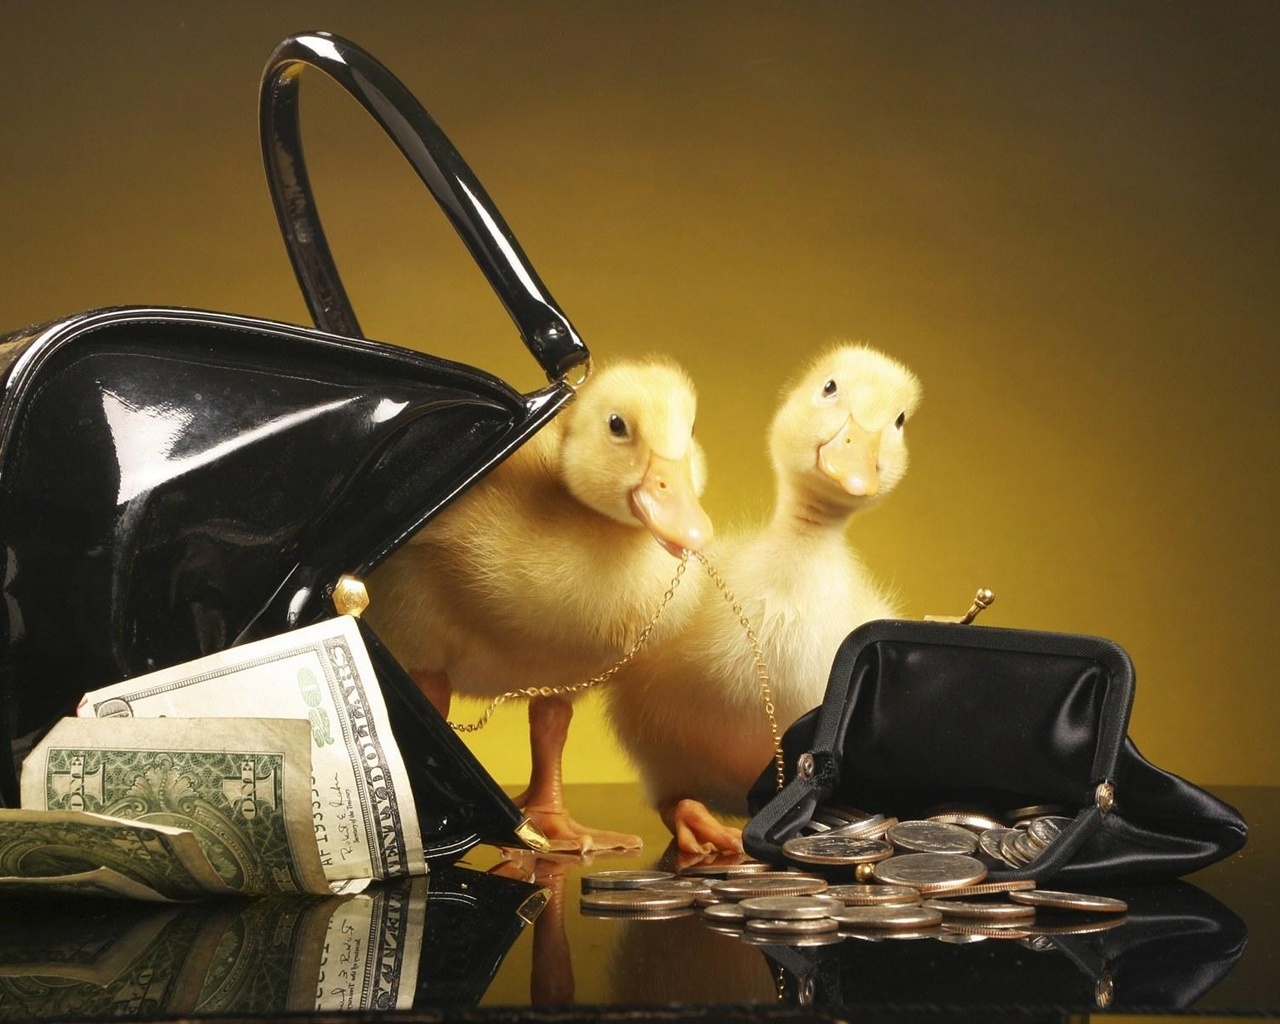 Ducklings with purse and money for 1280 x 1024 resolution